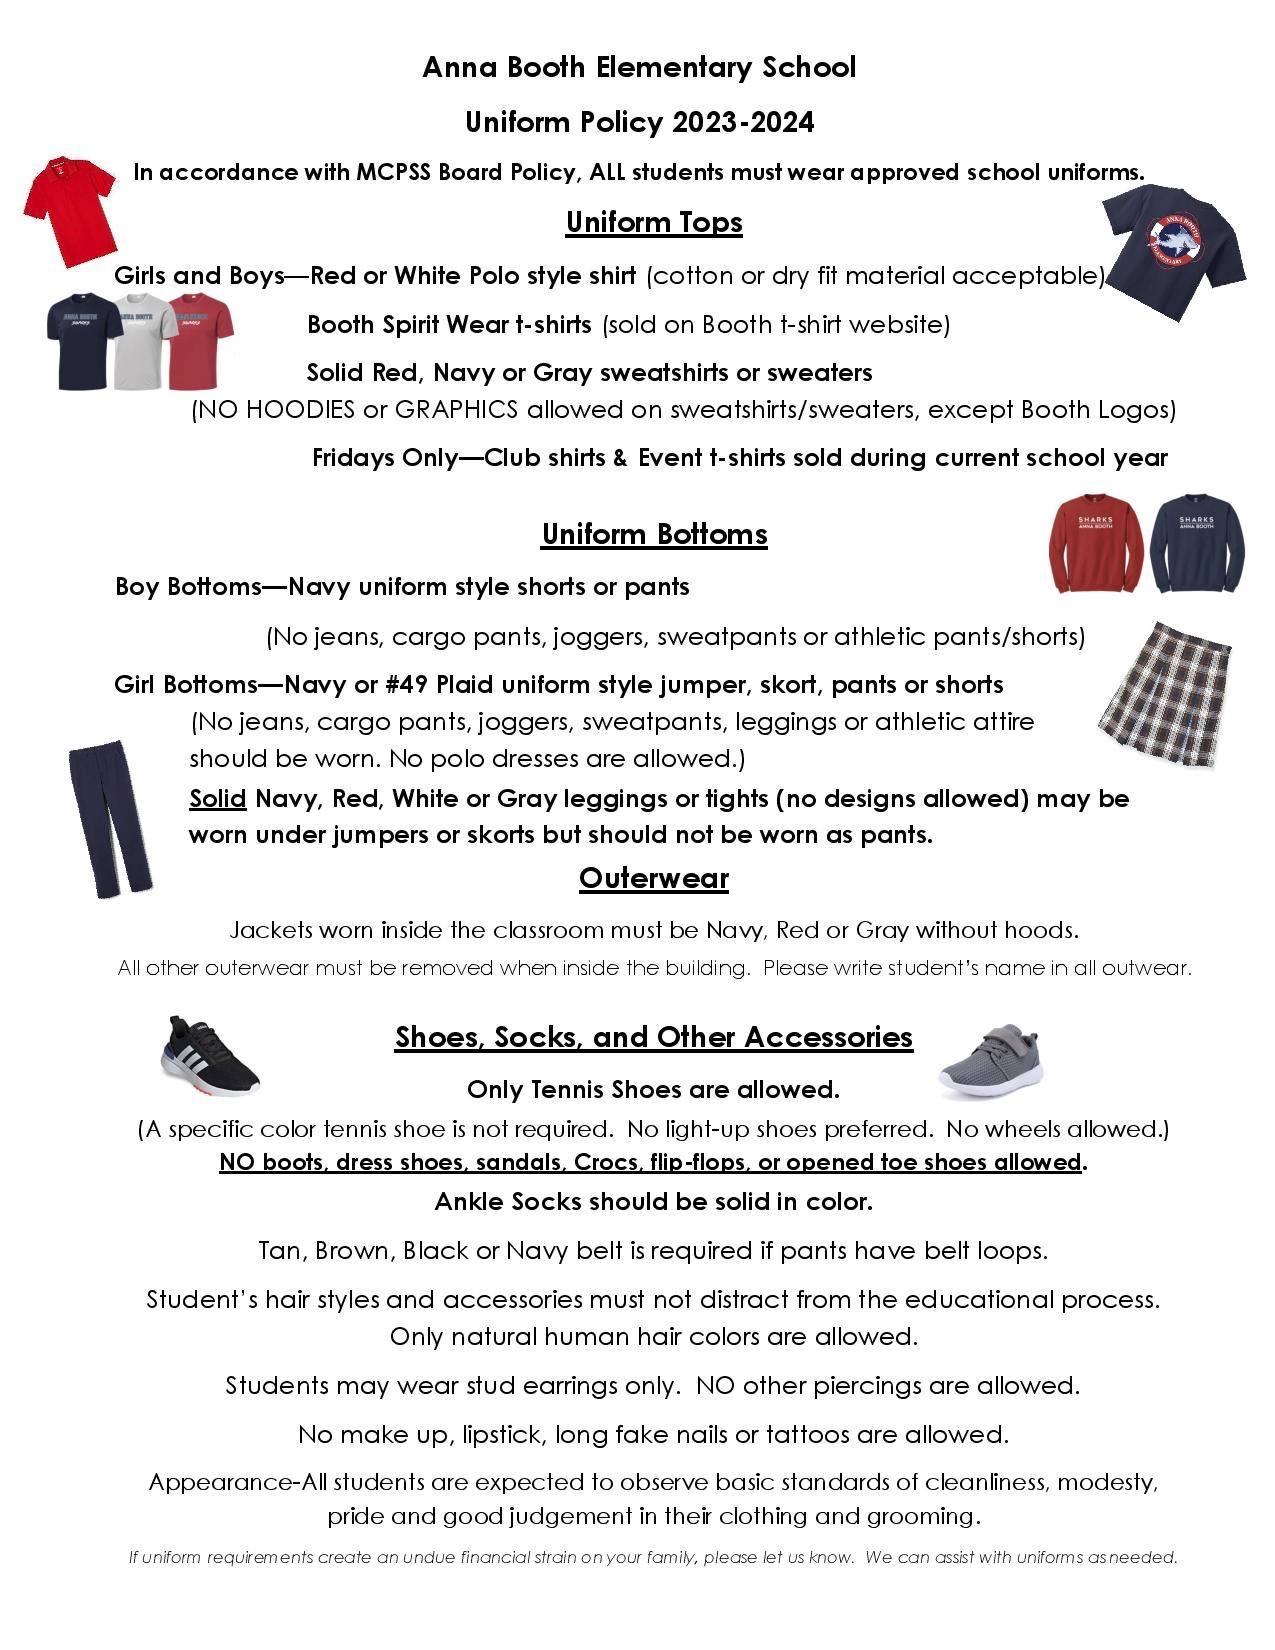 BOOTH UNIFORM POLICY